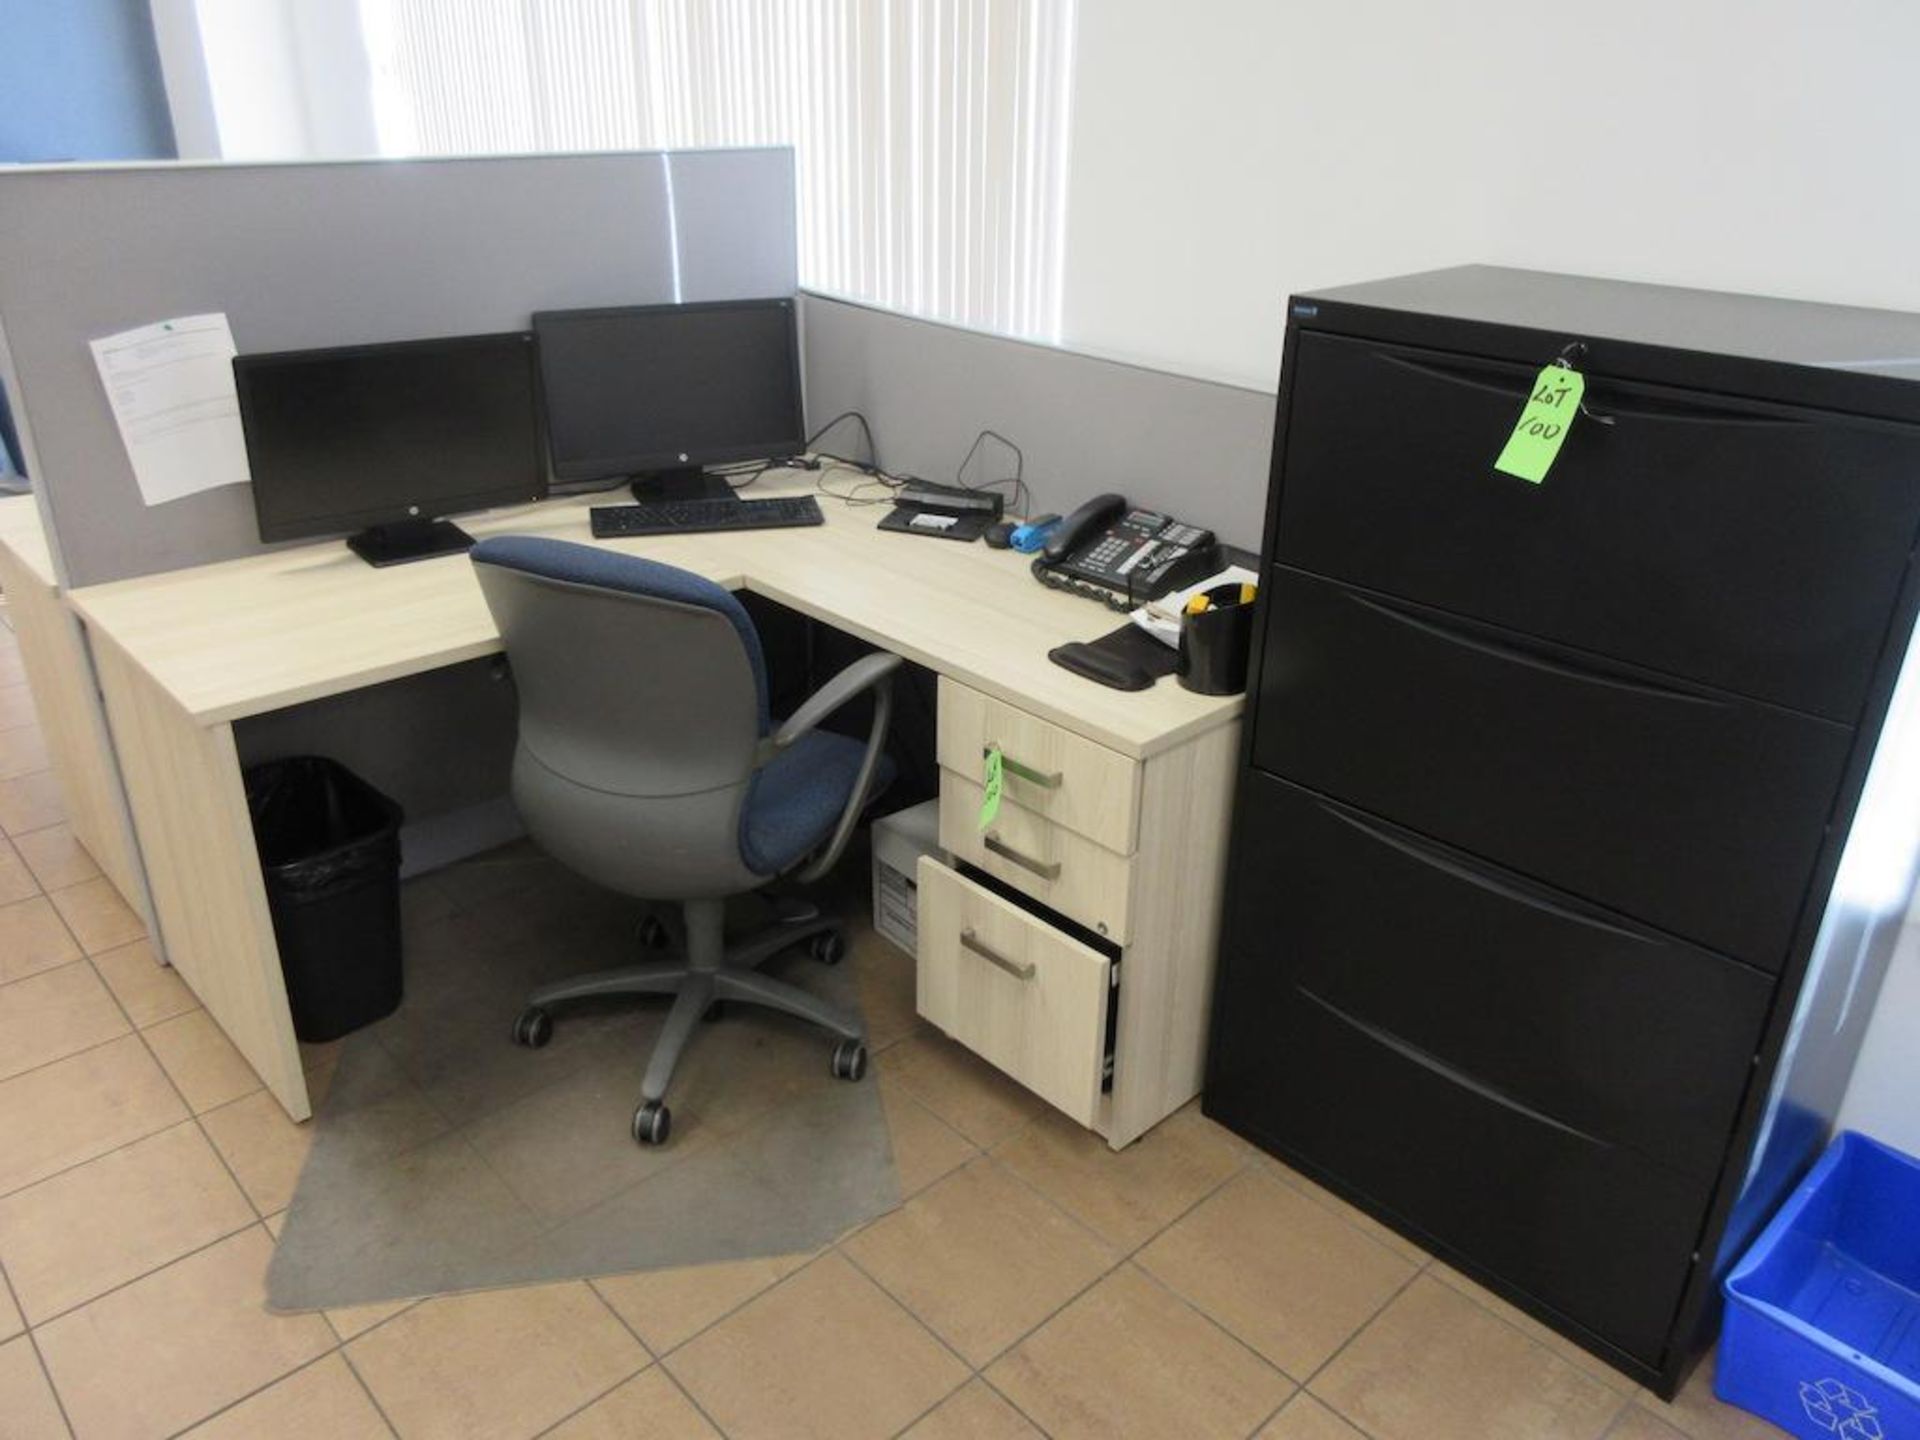 6 station grey office cubicles approx 60" x 60" x 60" w 6 light oak L shaped desks, 6 chairs, 4 dr l - Image 5 of 5